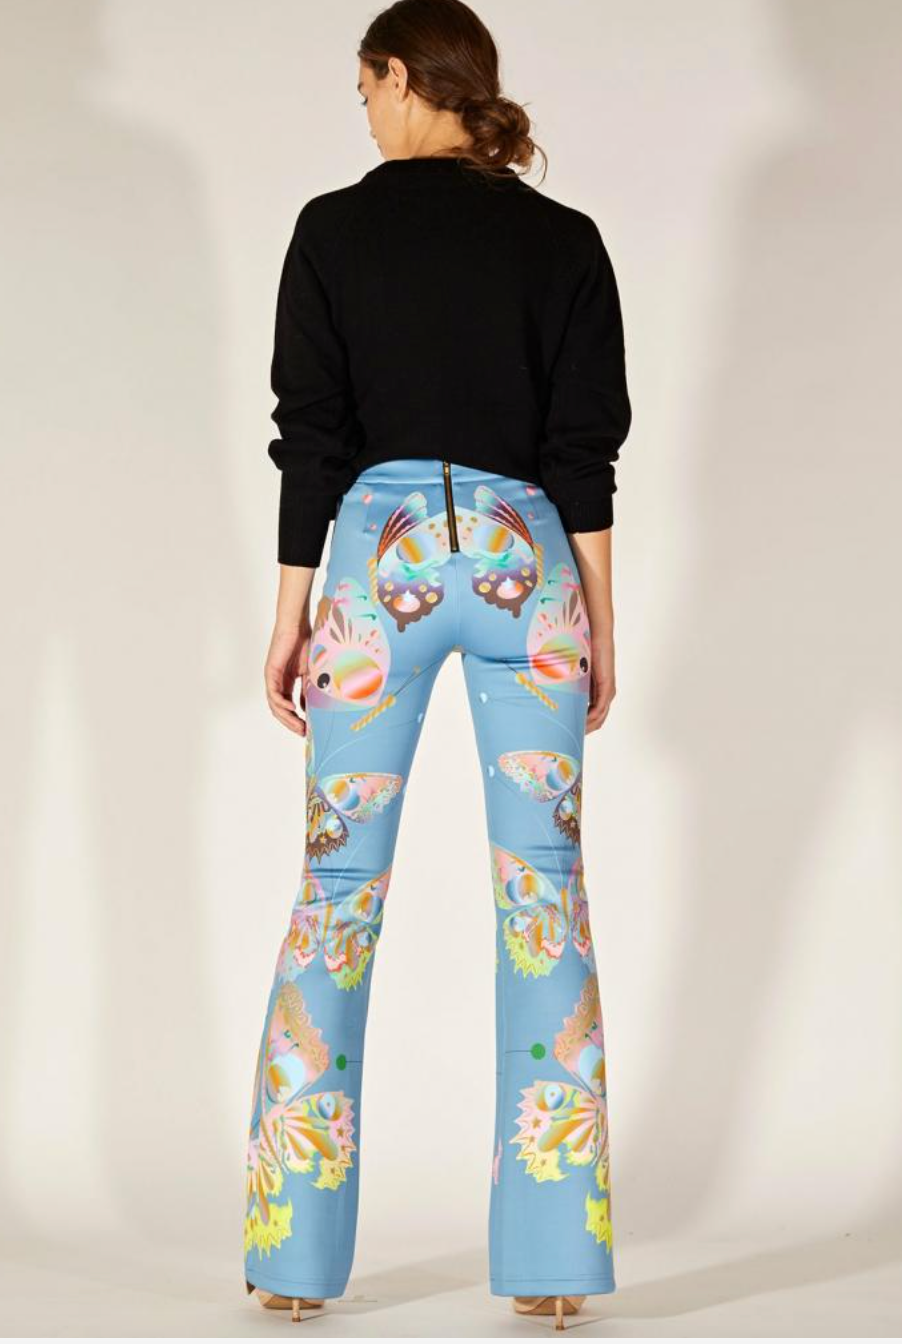 Bonded Fit and Flare Pants in Blue Butterfly